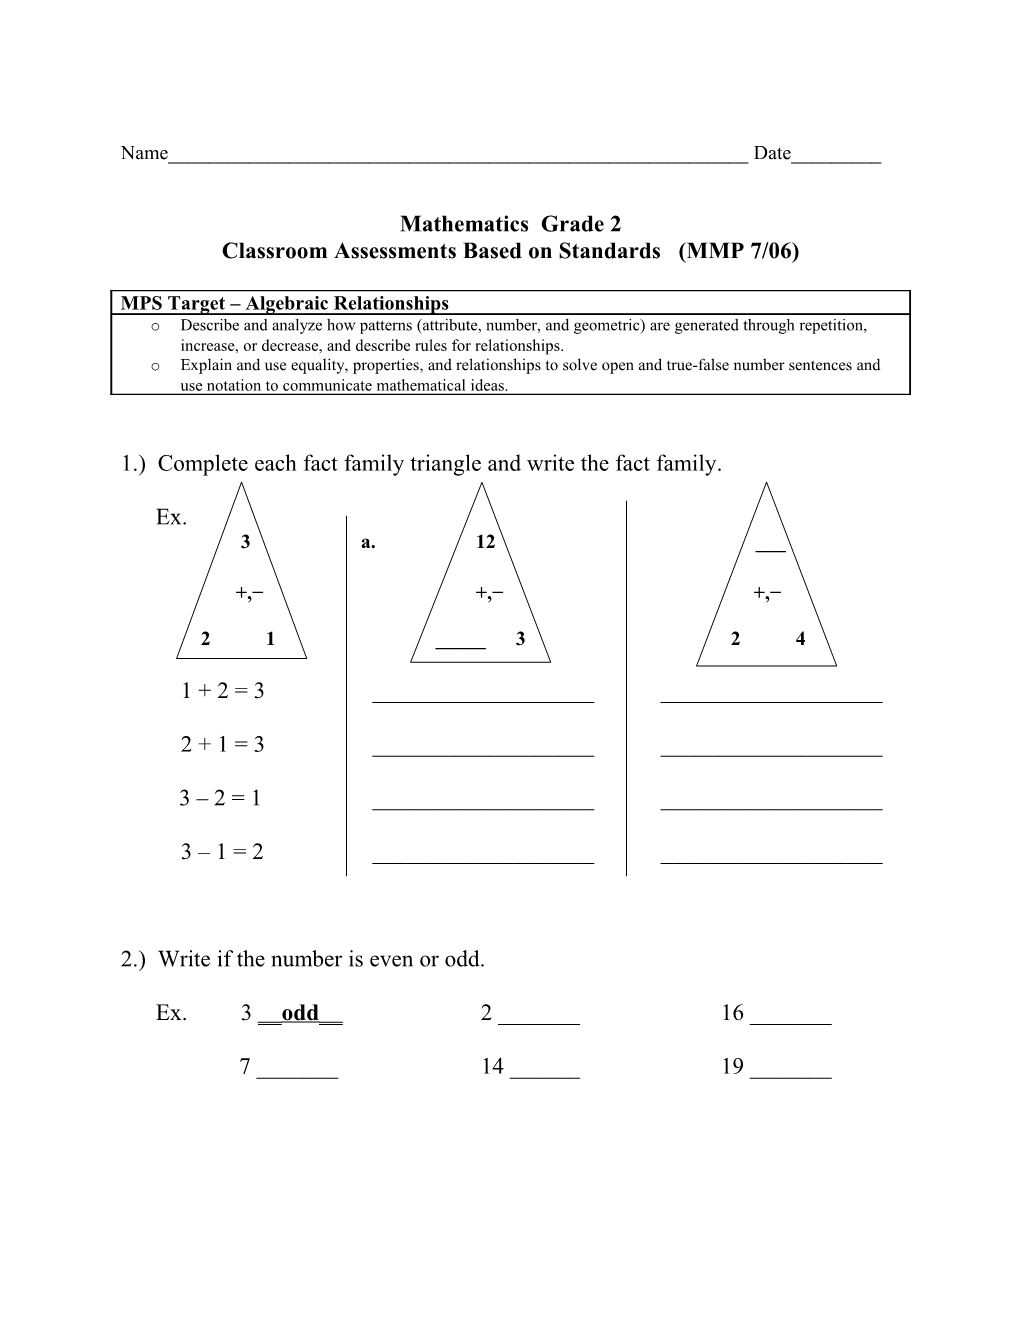 Classroom Assessments Based on Standards (MMP 7/06)